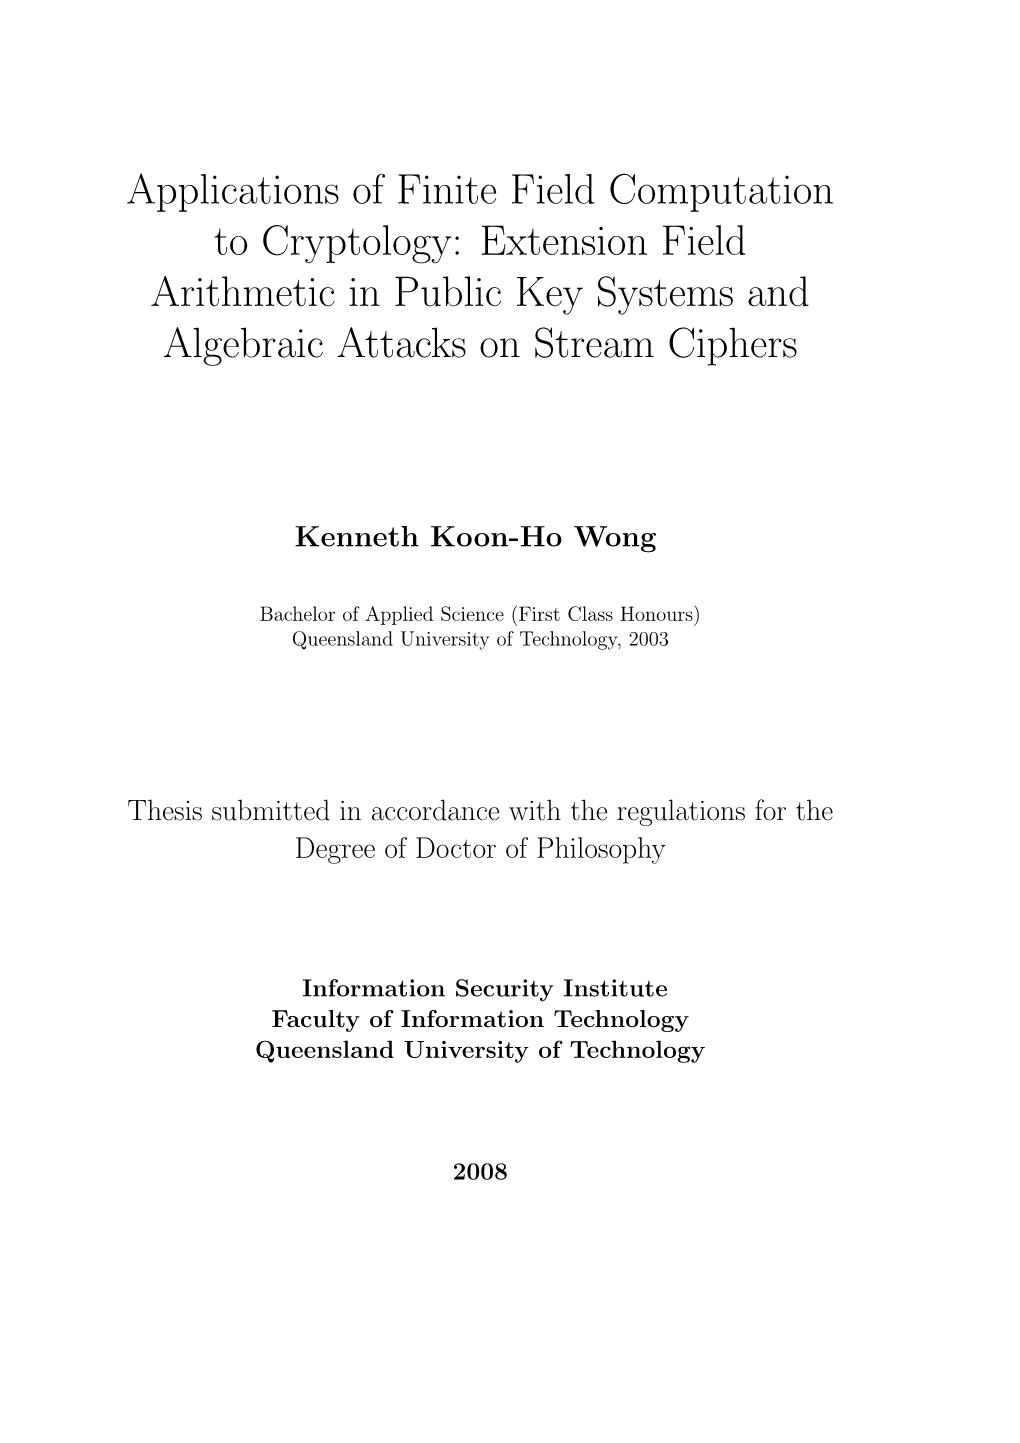 Applications of Finite Field Computation to Cryptology: Extension Field Arithmetic in Public Key Systems and Algebraic Attacks on Stream Ciphers